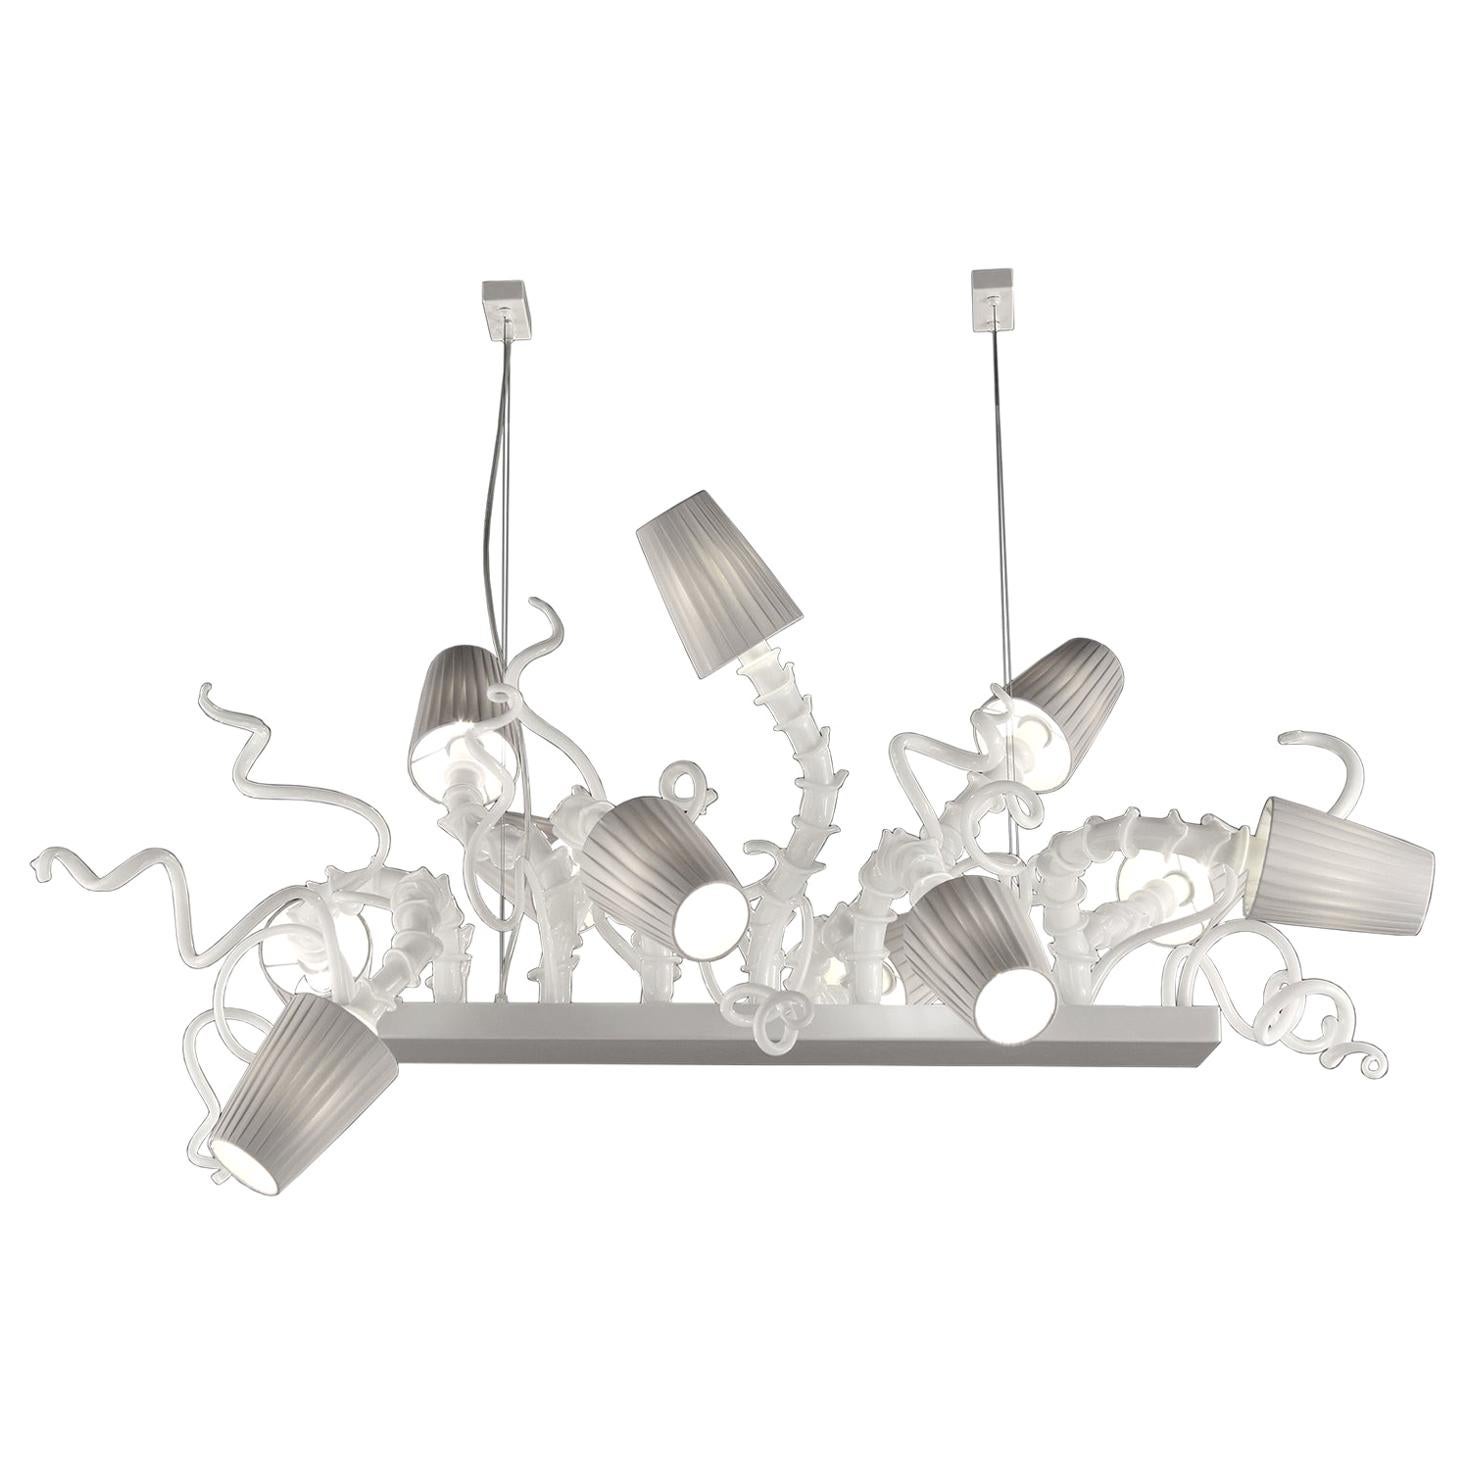 21st Century Artistic Chandelier 11 Arms Handmade Murano Glass by Multiforme For Sale